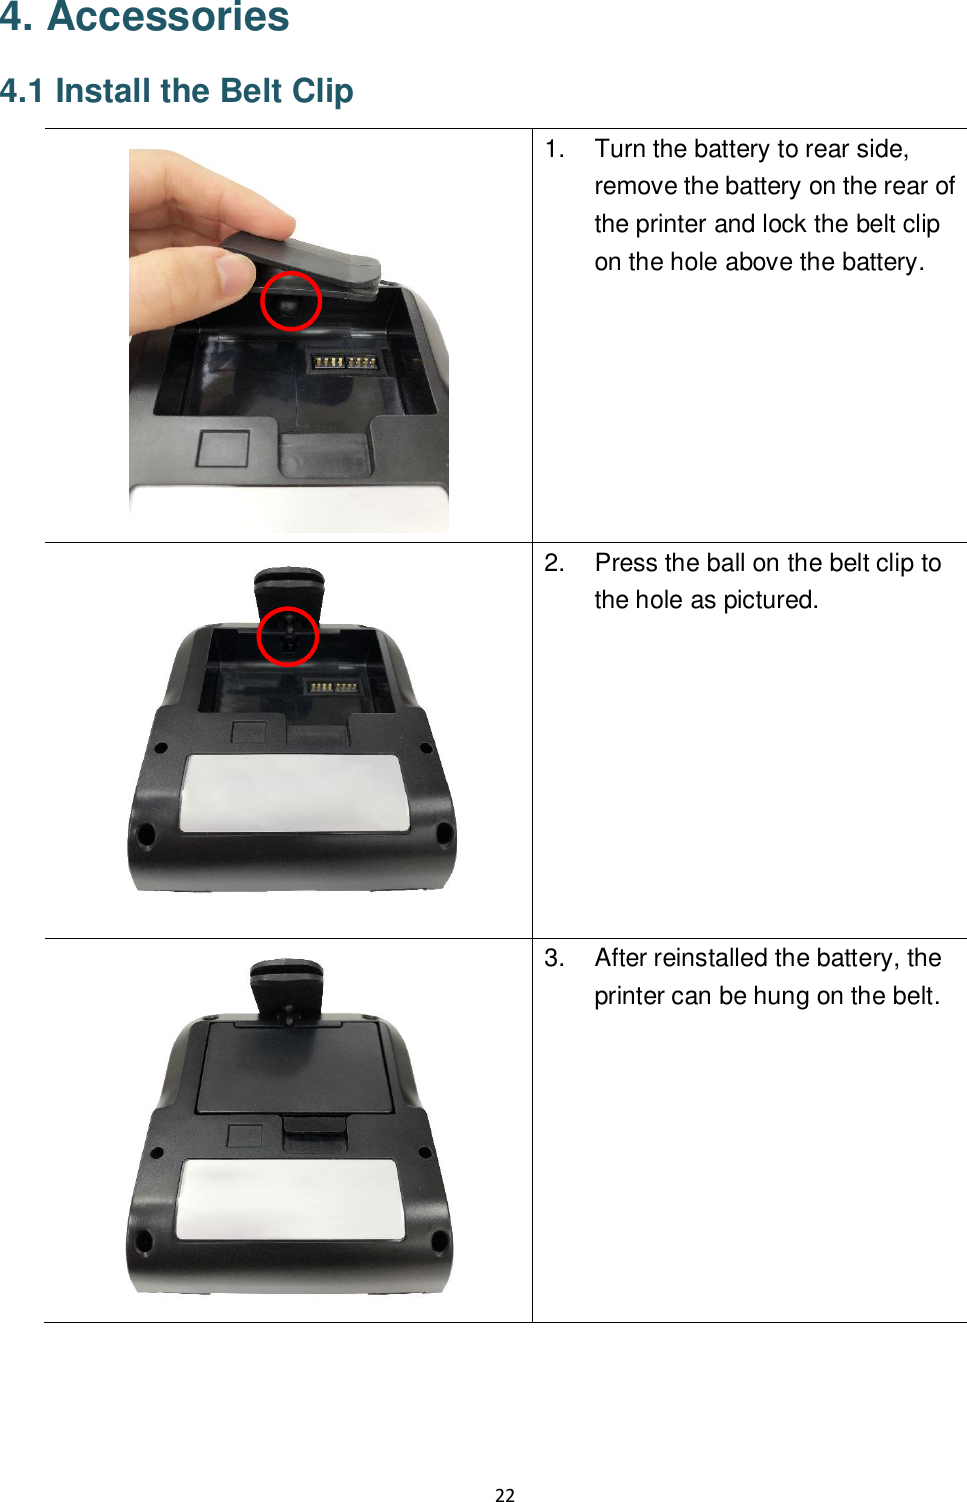 22  4. Accessories 4.1 Install the Belt Clip  1.  Turn the battery to rear side, remove the battery on the rear of the printer and lock the belt clip on the hole above the battery.  2.  Press the ball on the belt clip to the hole as pictured.   3.  After reinstalled the battery, the printer can be hung on the belt.     